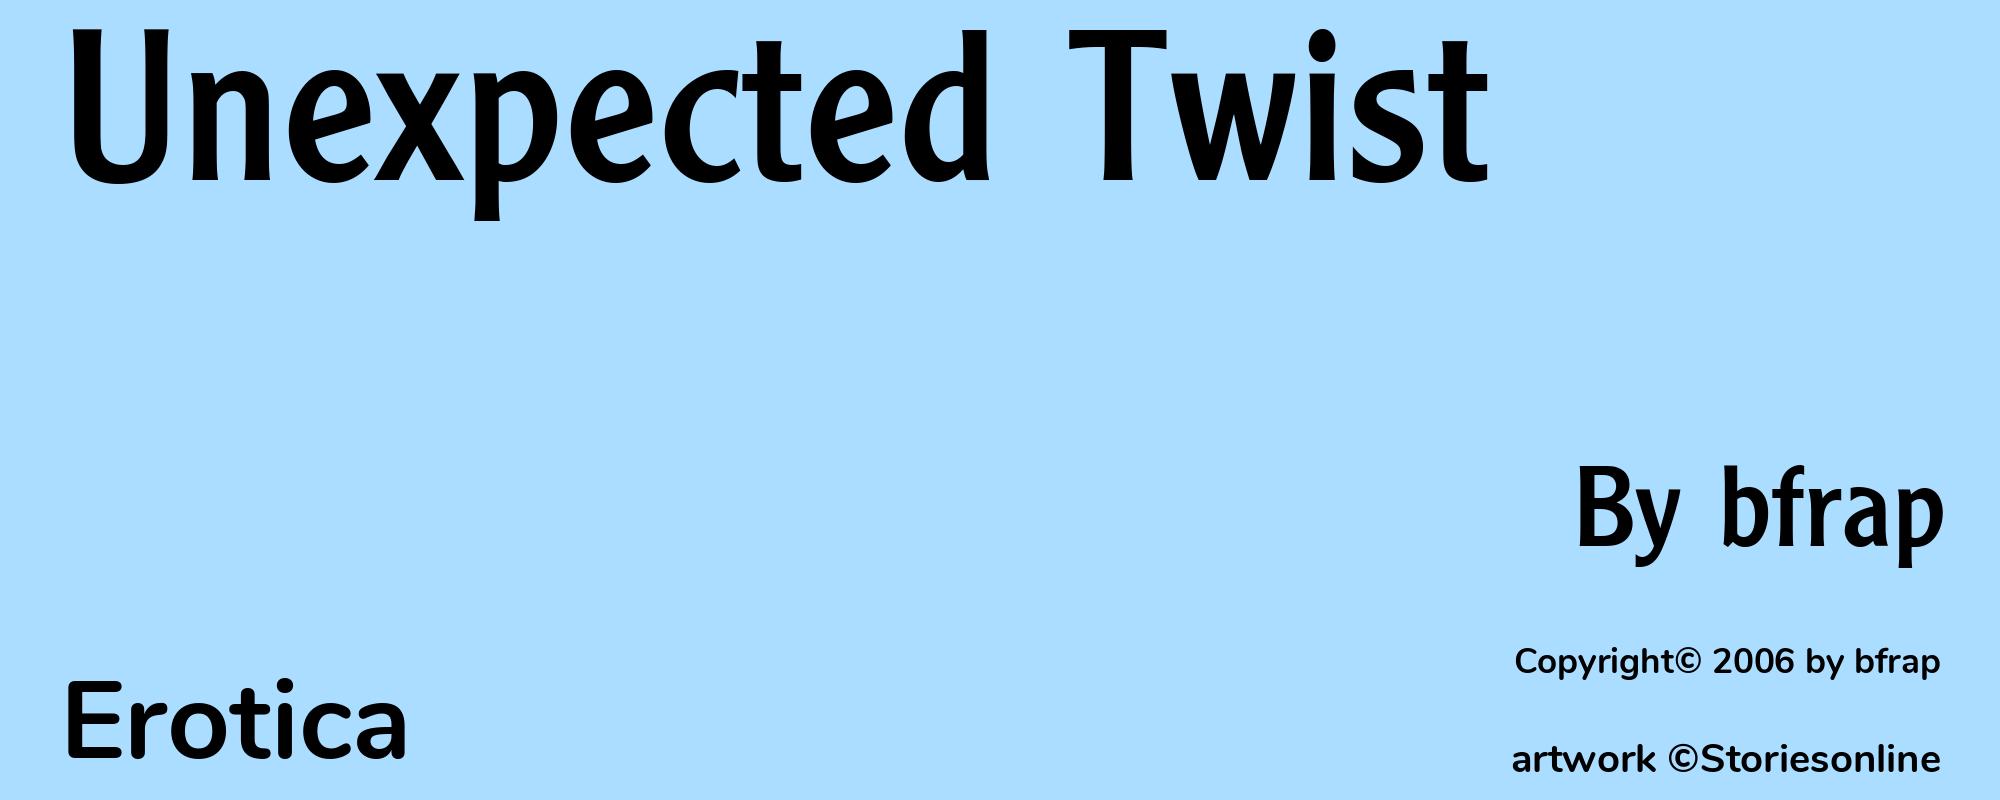 Unexpected Twist - Cover